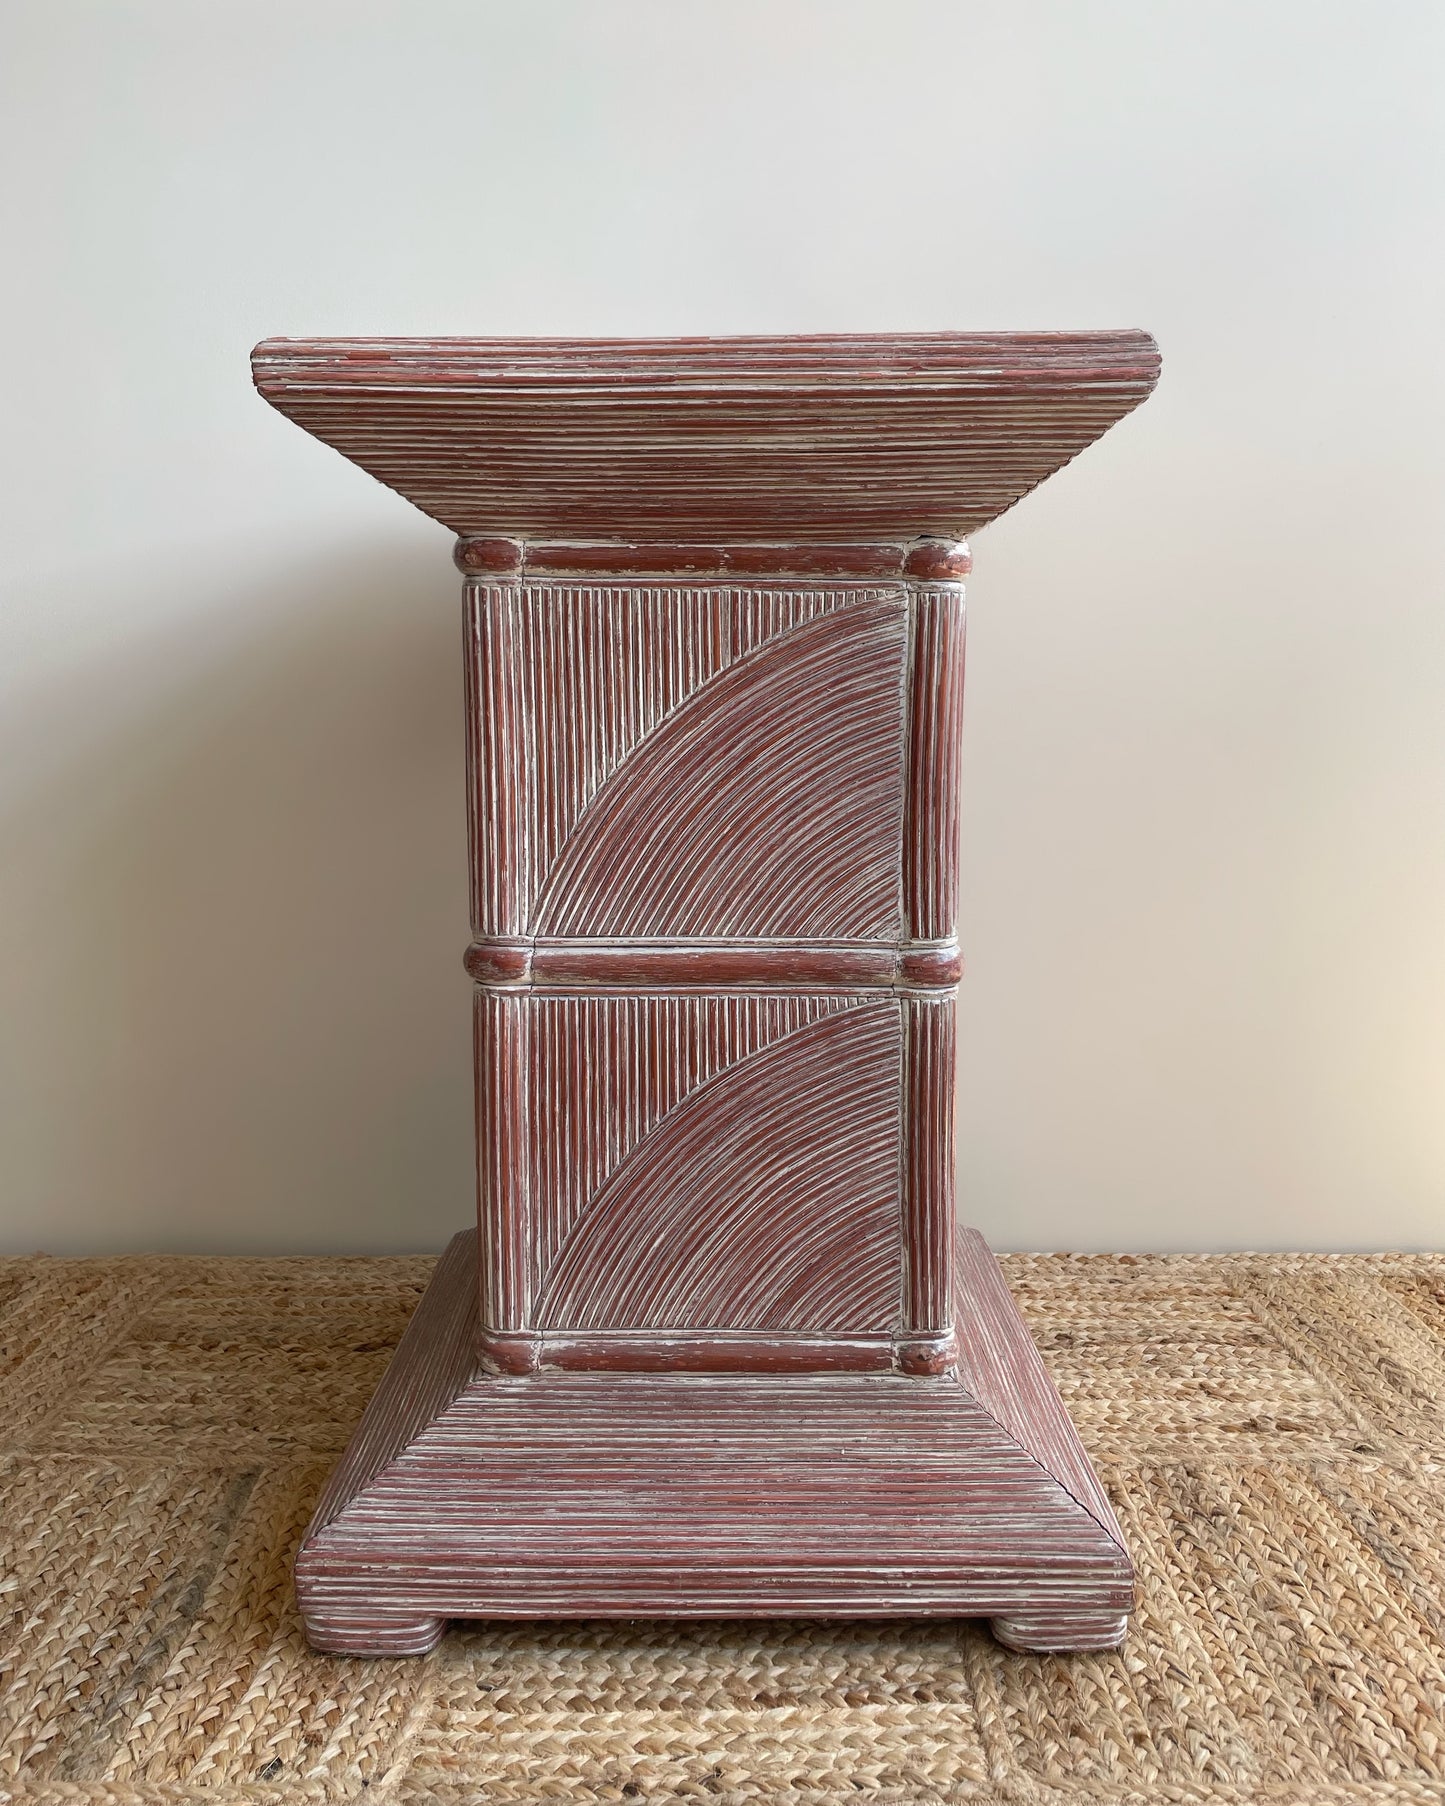 Pencil Reed Side Table